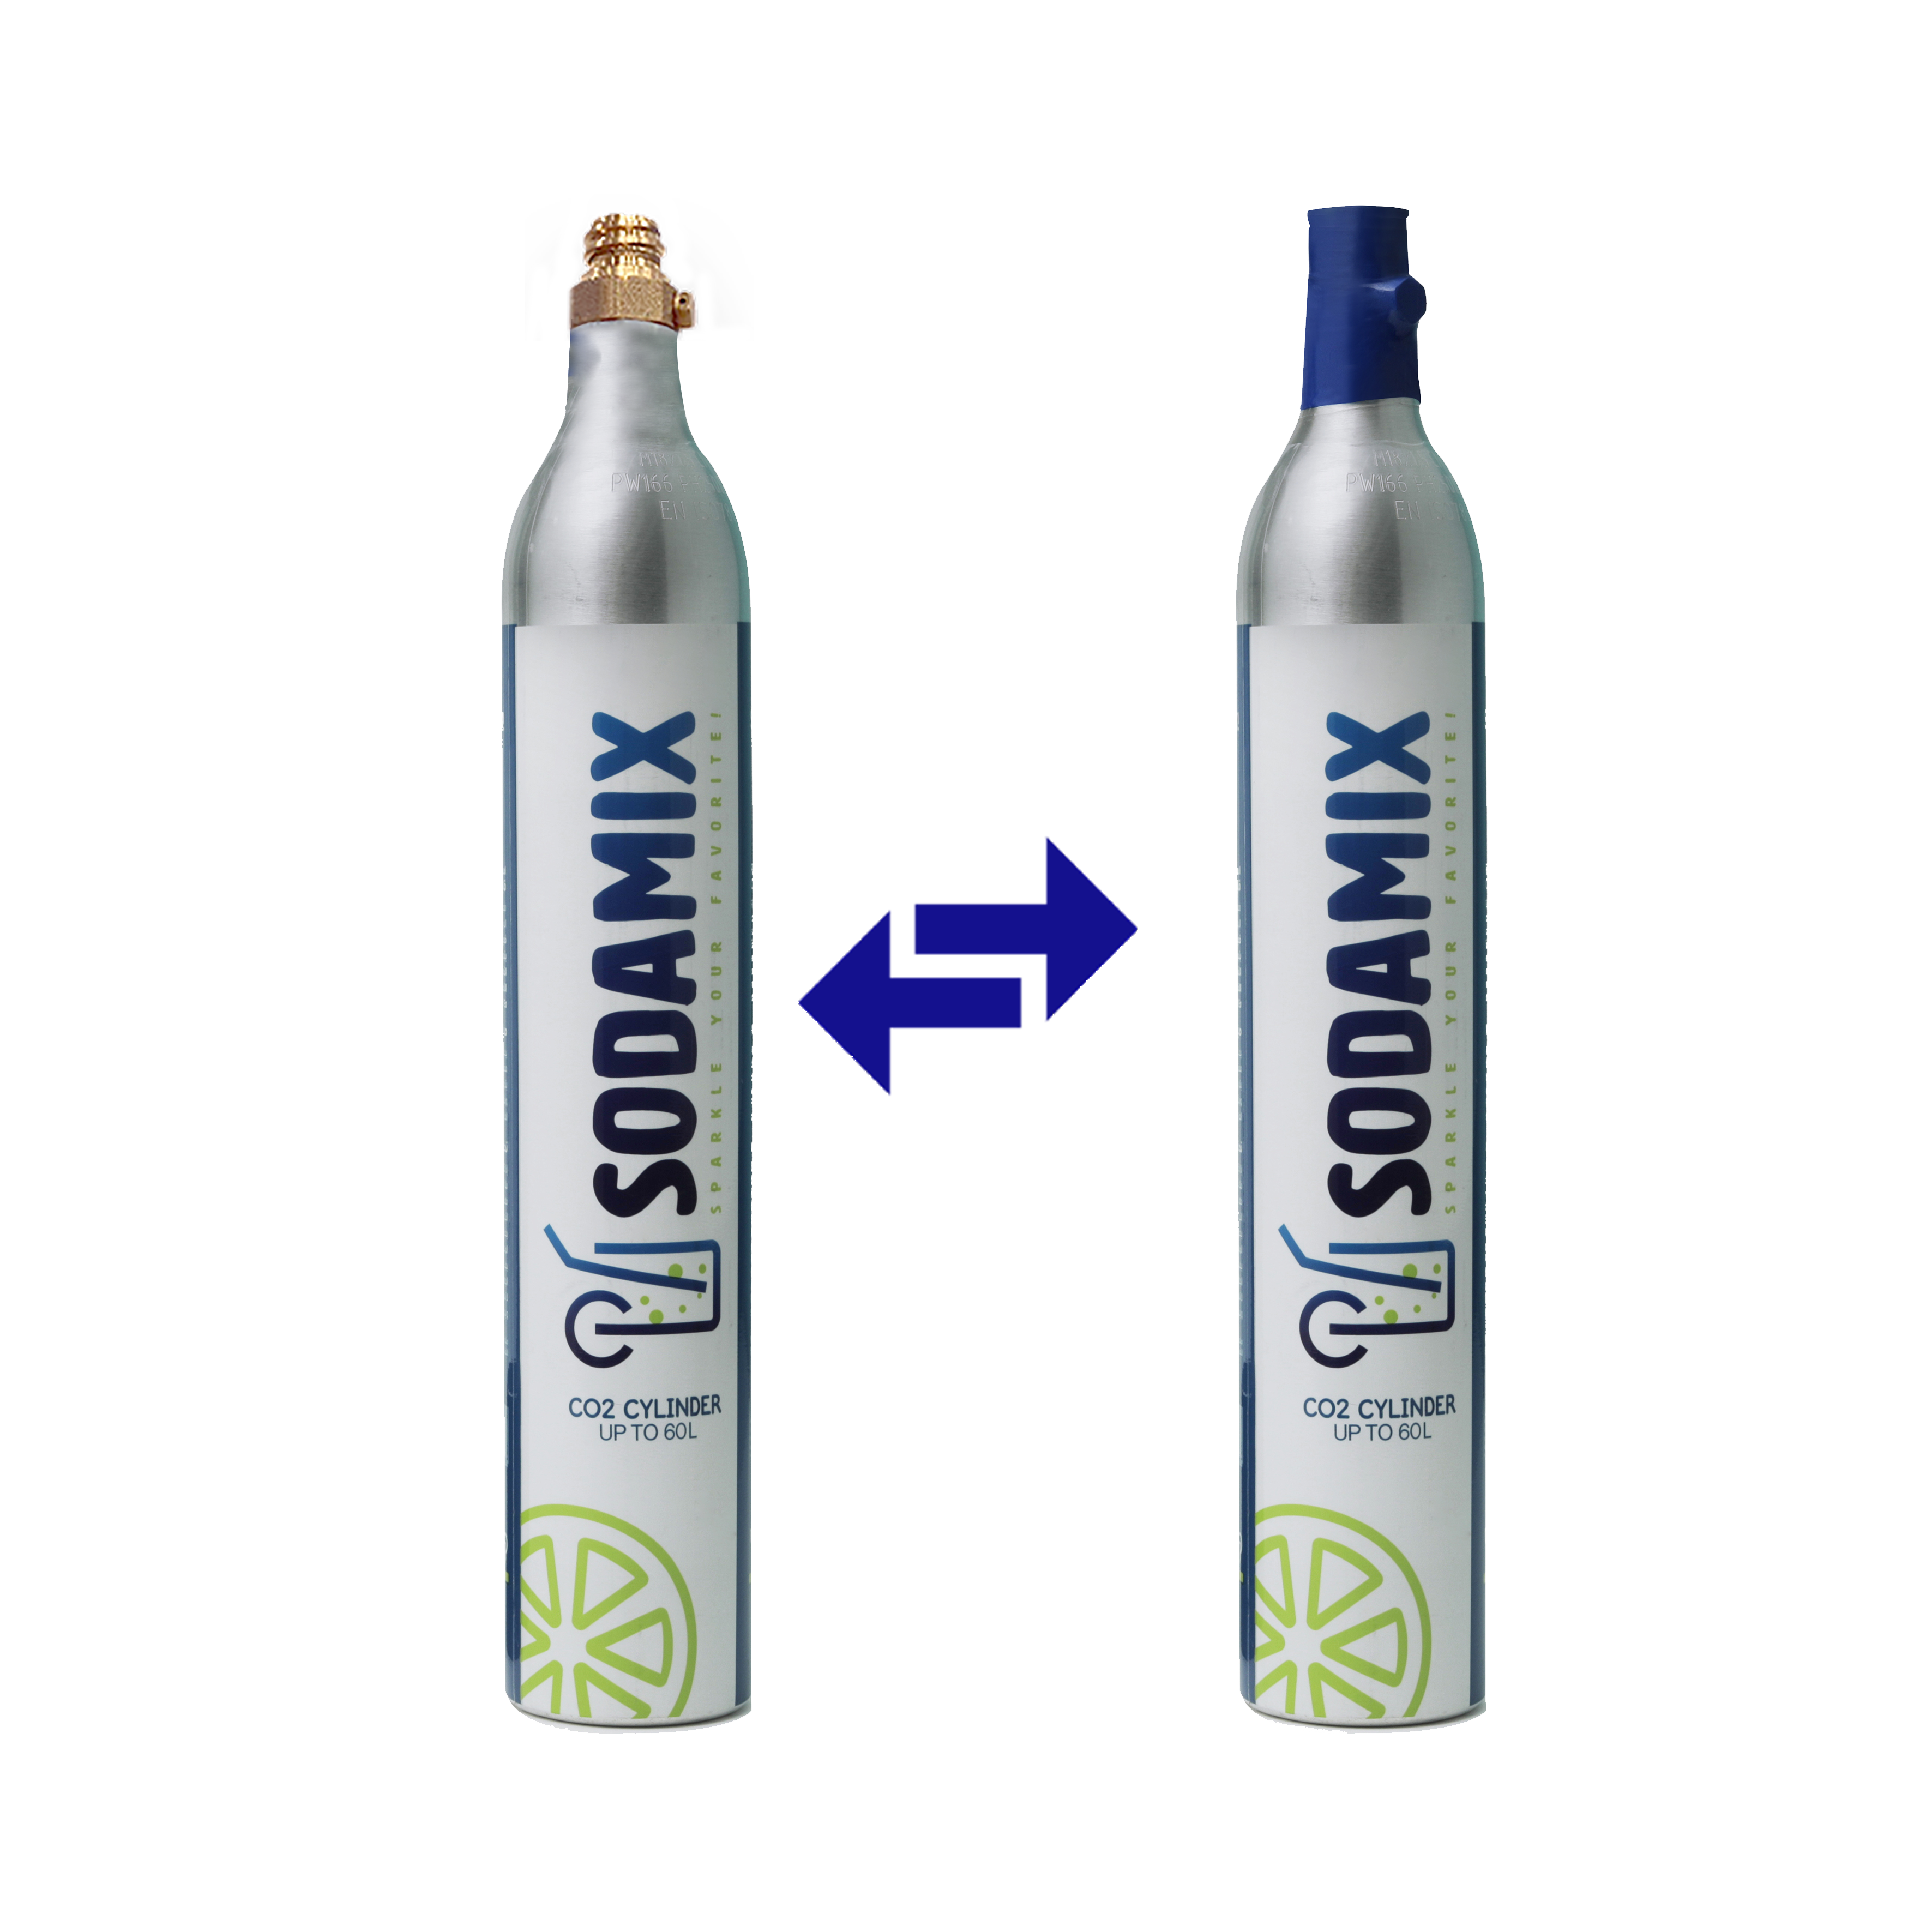 Sodamix CO2 Refill/Exchange cylinder (Compatible with Bubble bro DrinkMate & Aarke Soda Makers)